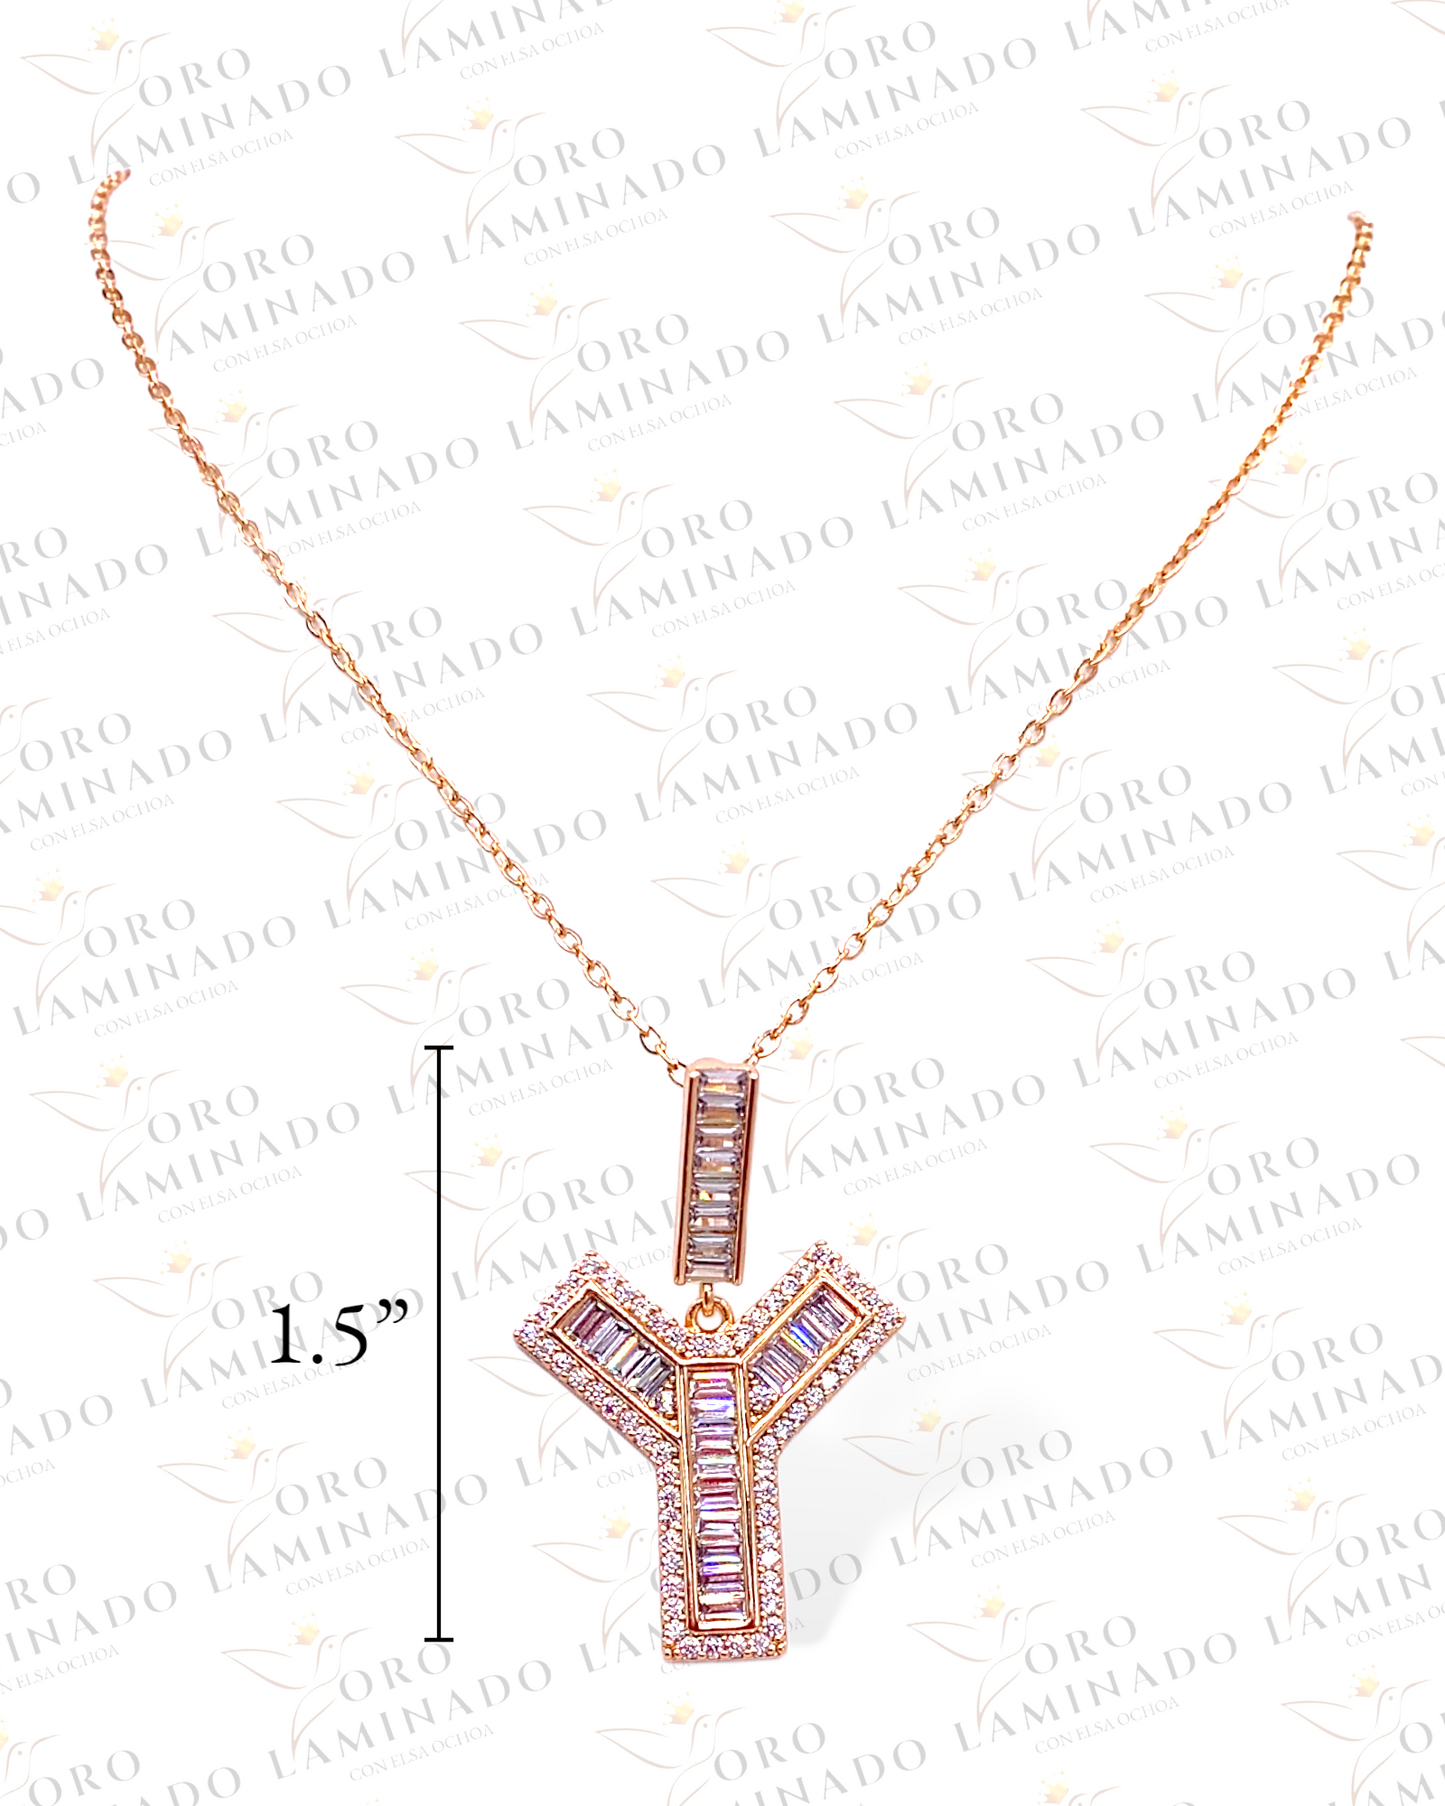 High Quality 1.5” Letter Y Pendant and Chain B218